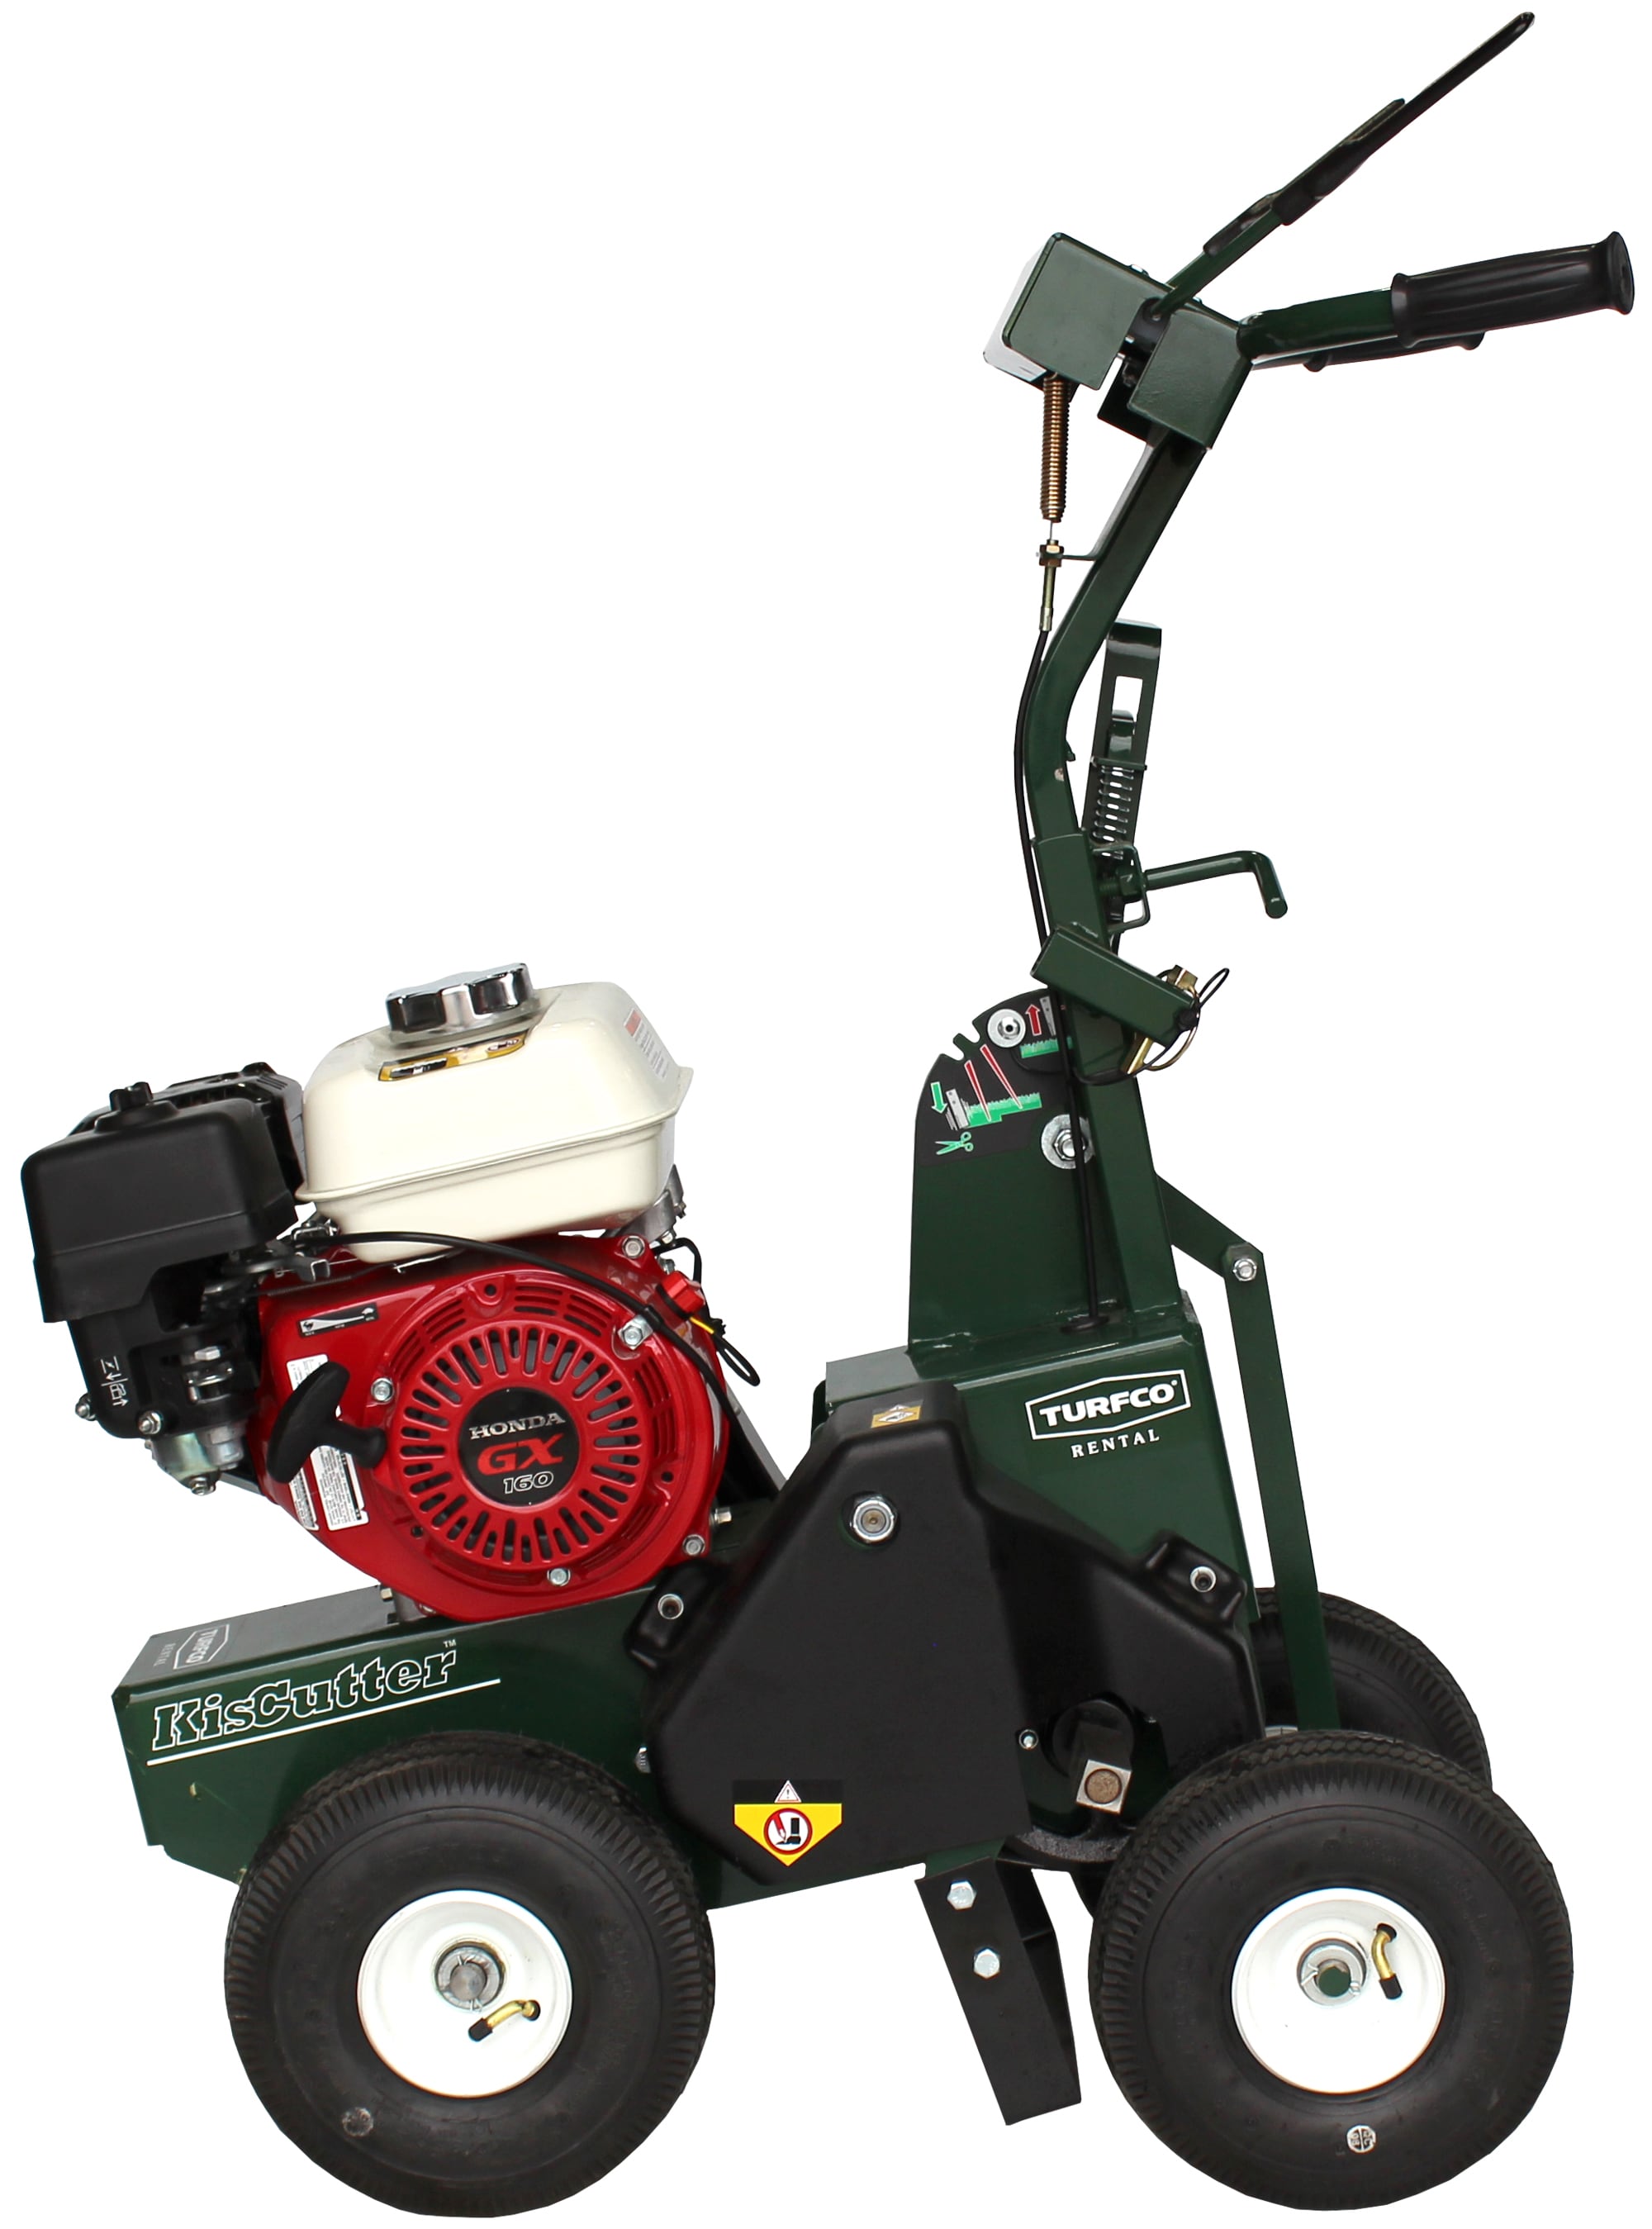 Professional Landscaping Edgers & Sodcutters - KisCutter Sod Cutter - Turfco